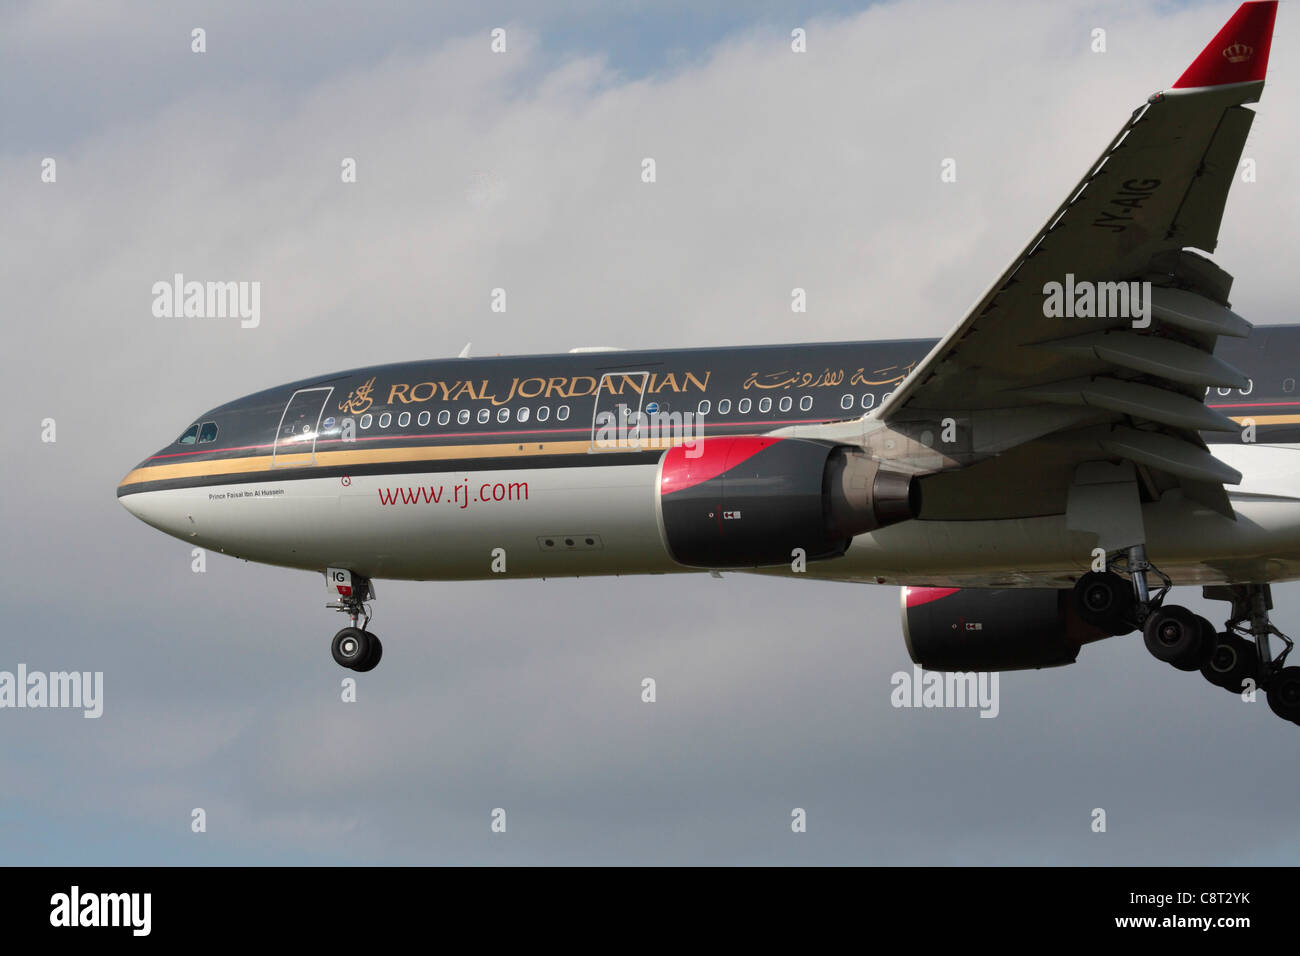 Royal Jordanian Airlines Airbus A330-200 widebody airliner flying on approach. Close up view of front section including wings and engines. Stock Photo